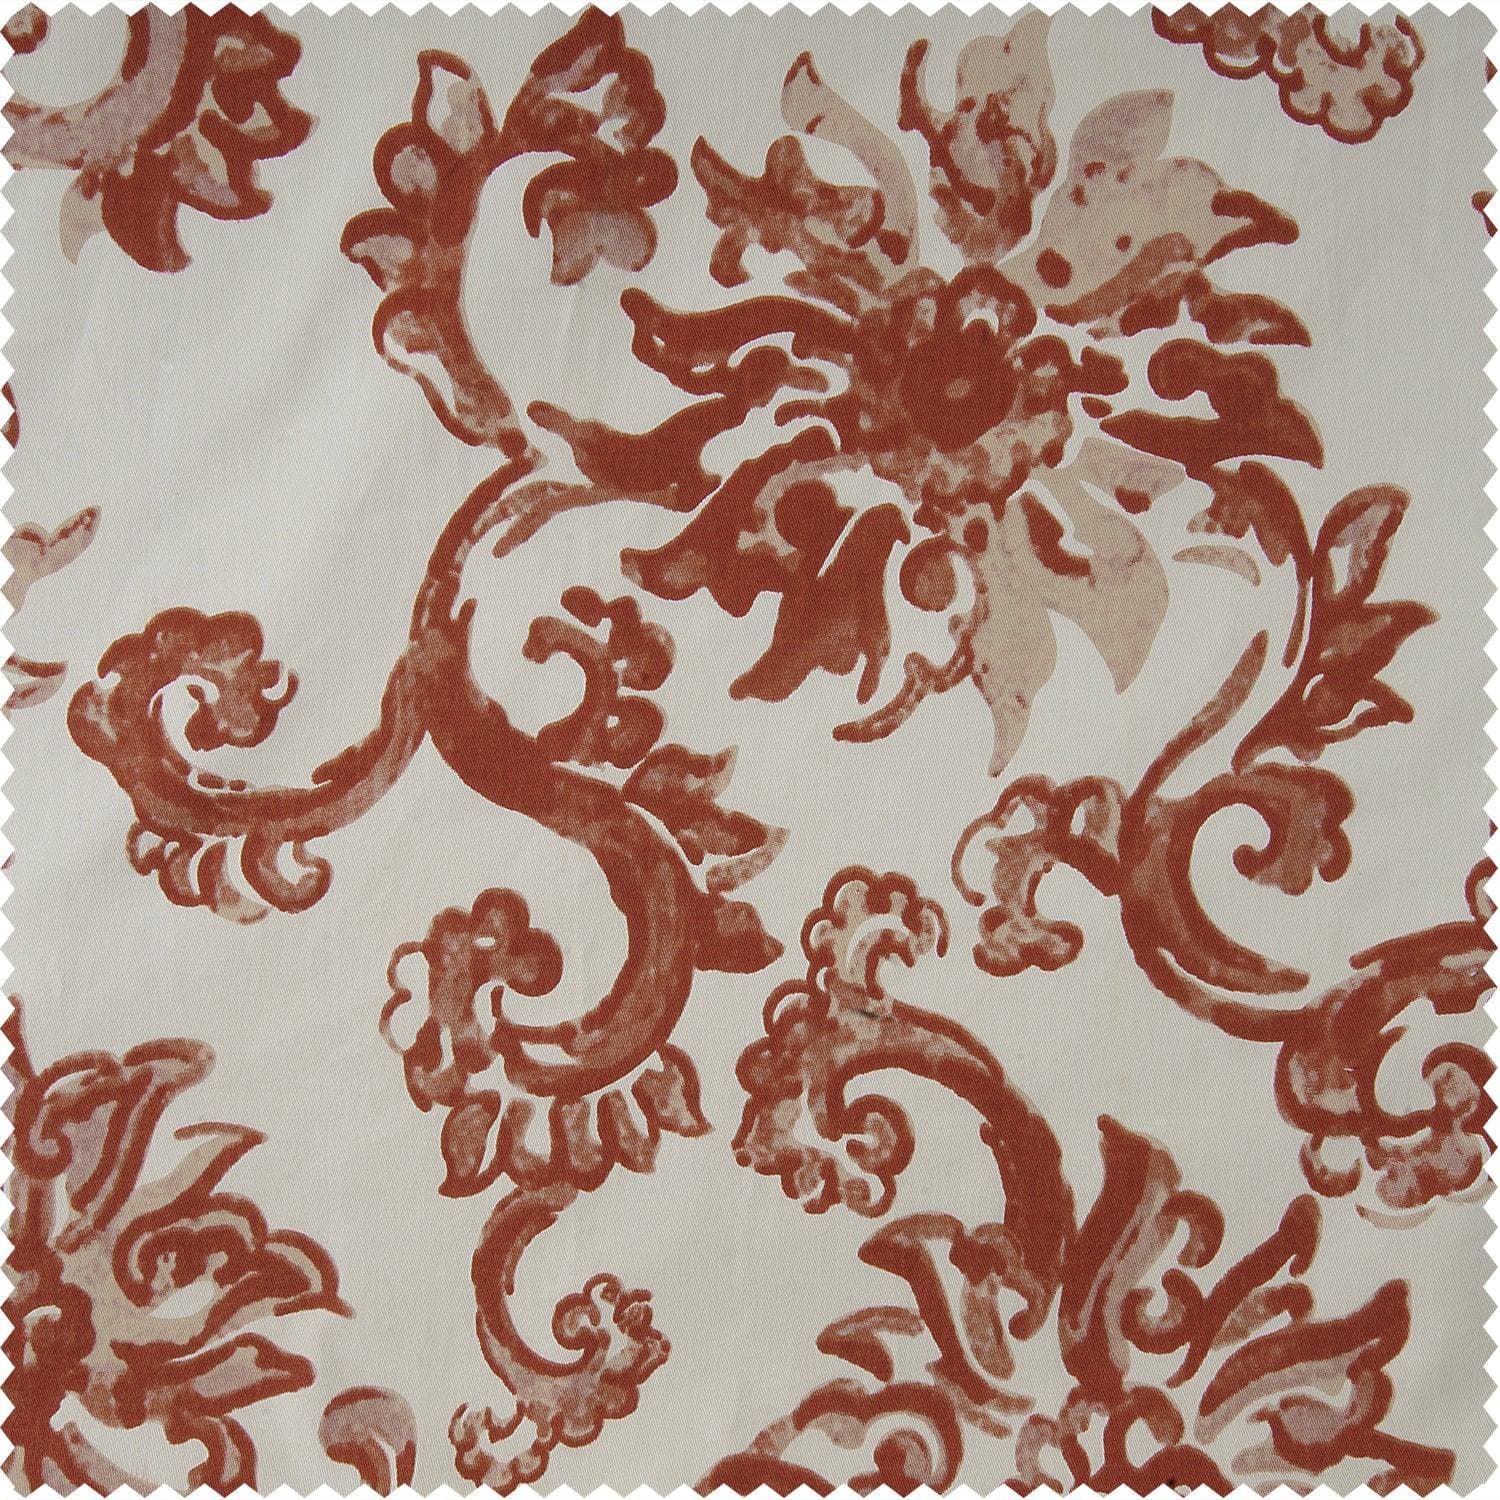 Indonesian Rust Printed Cotton Swatch